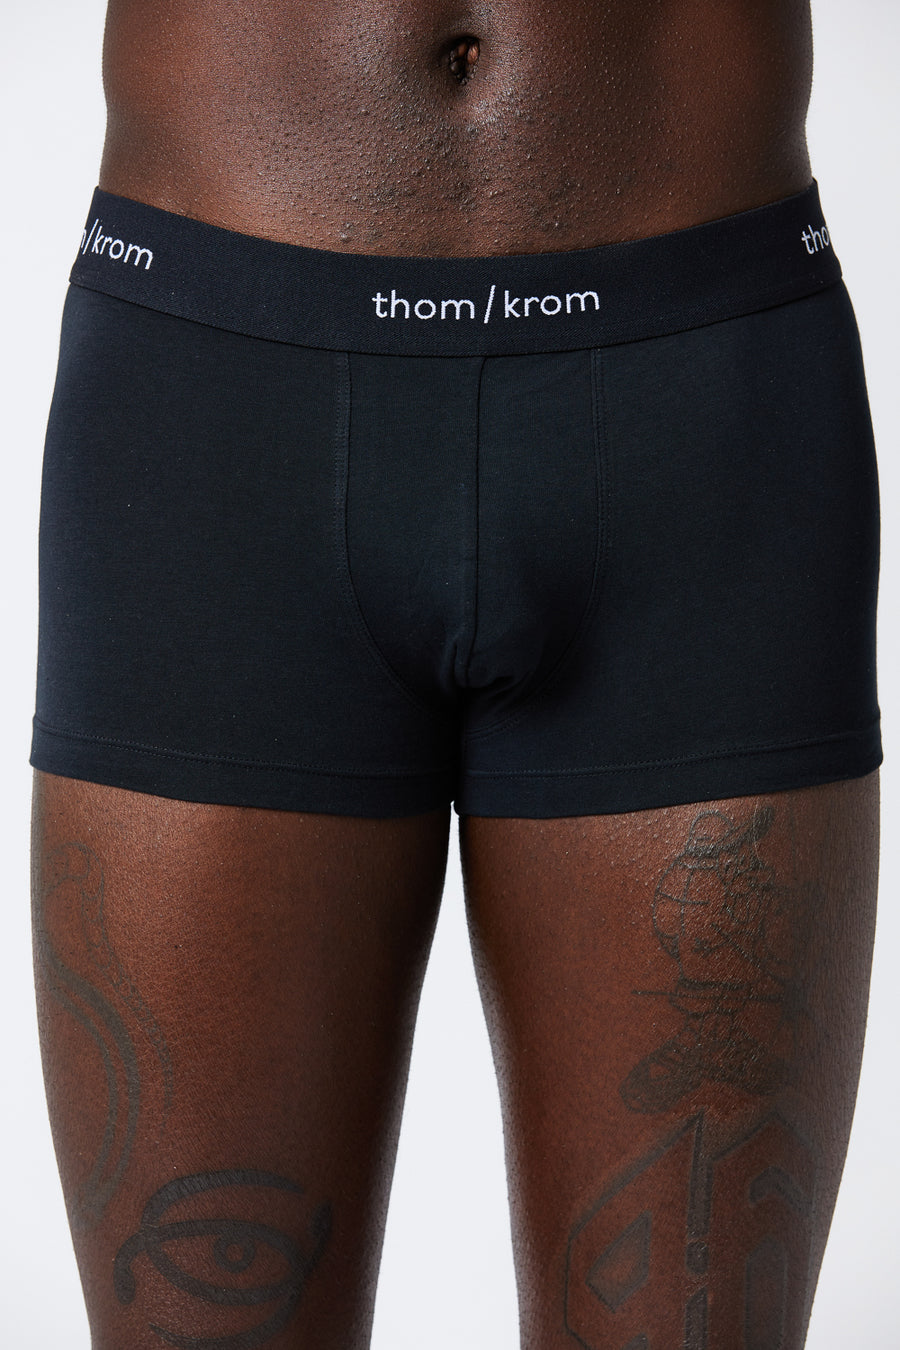 Buy the Thom Krom TRUNK1 in Black at Intro. Spend £50 for free UK delivery. Official stockists. We ship worldwide.